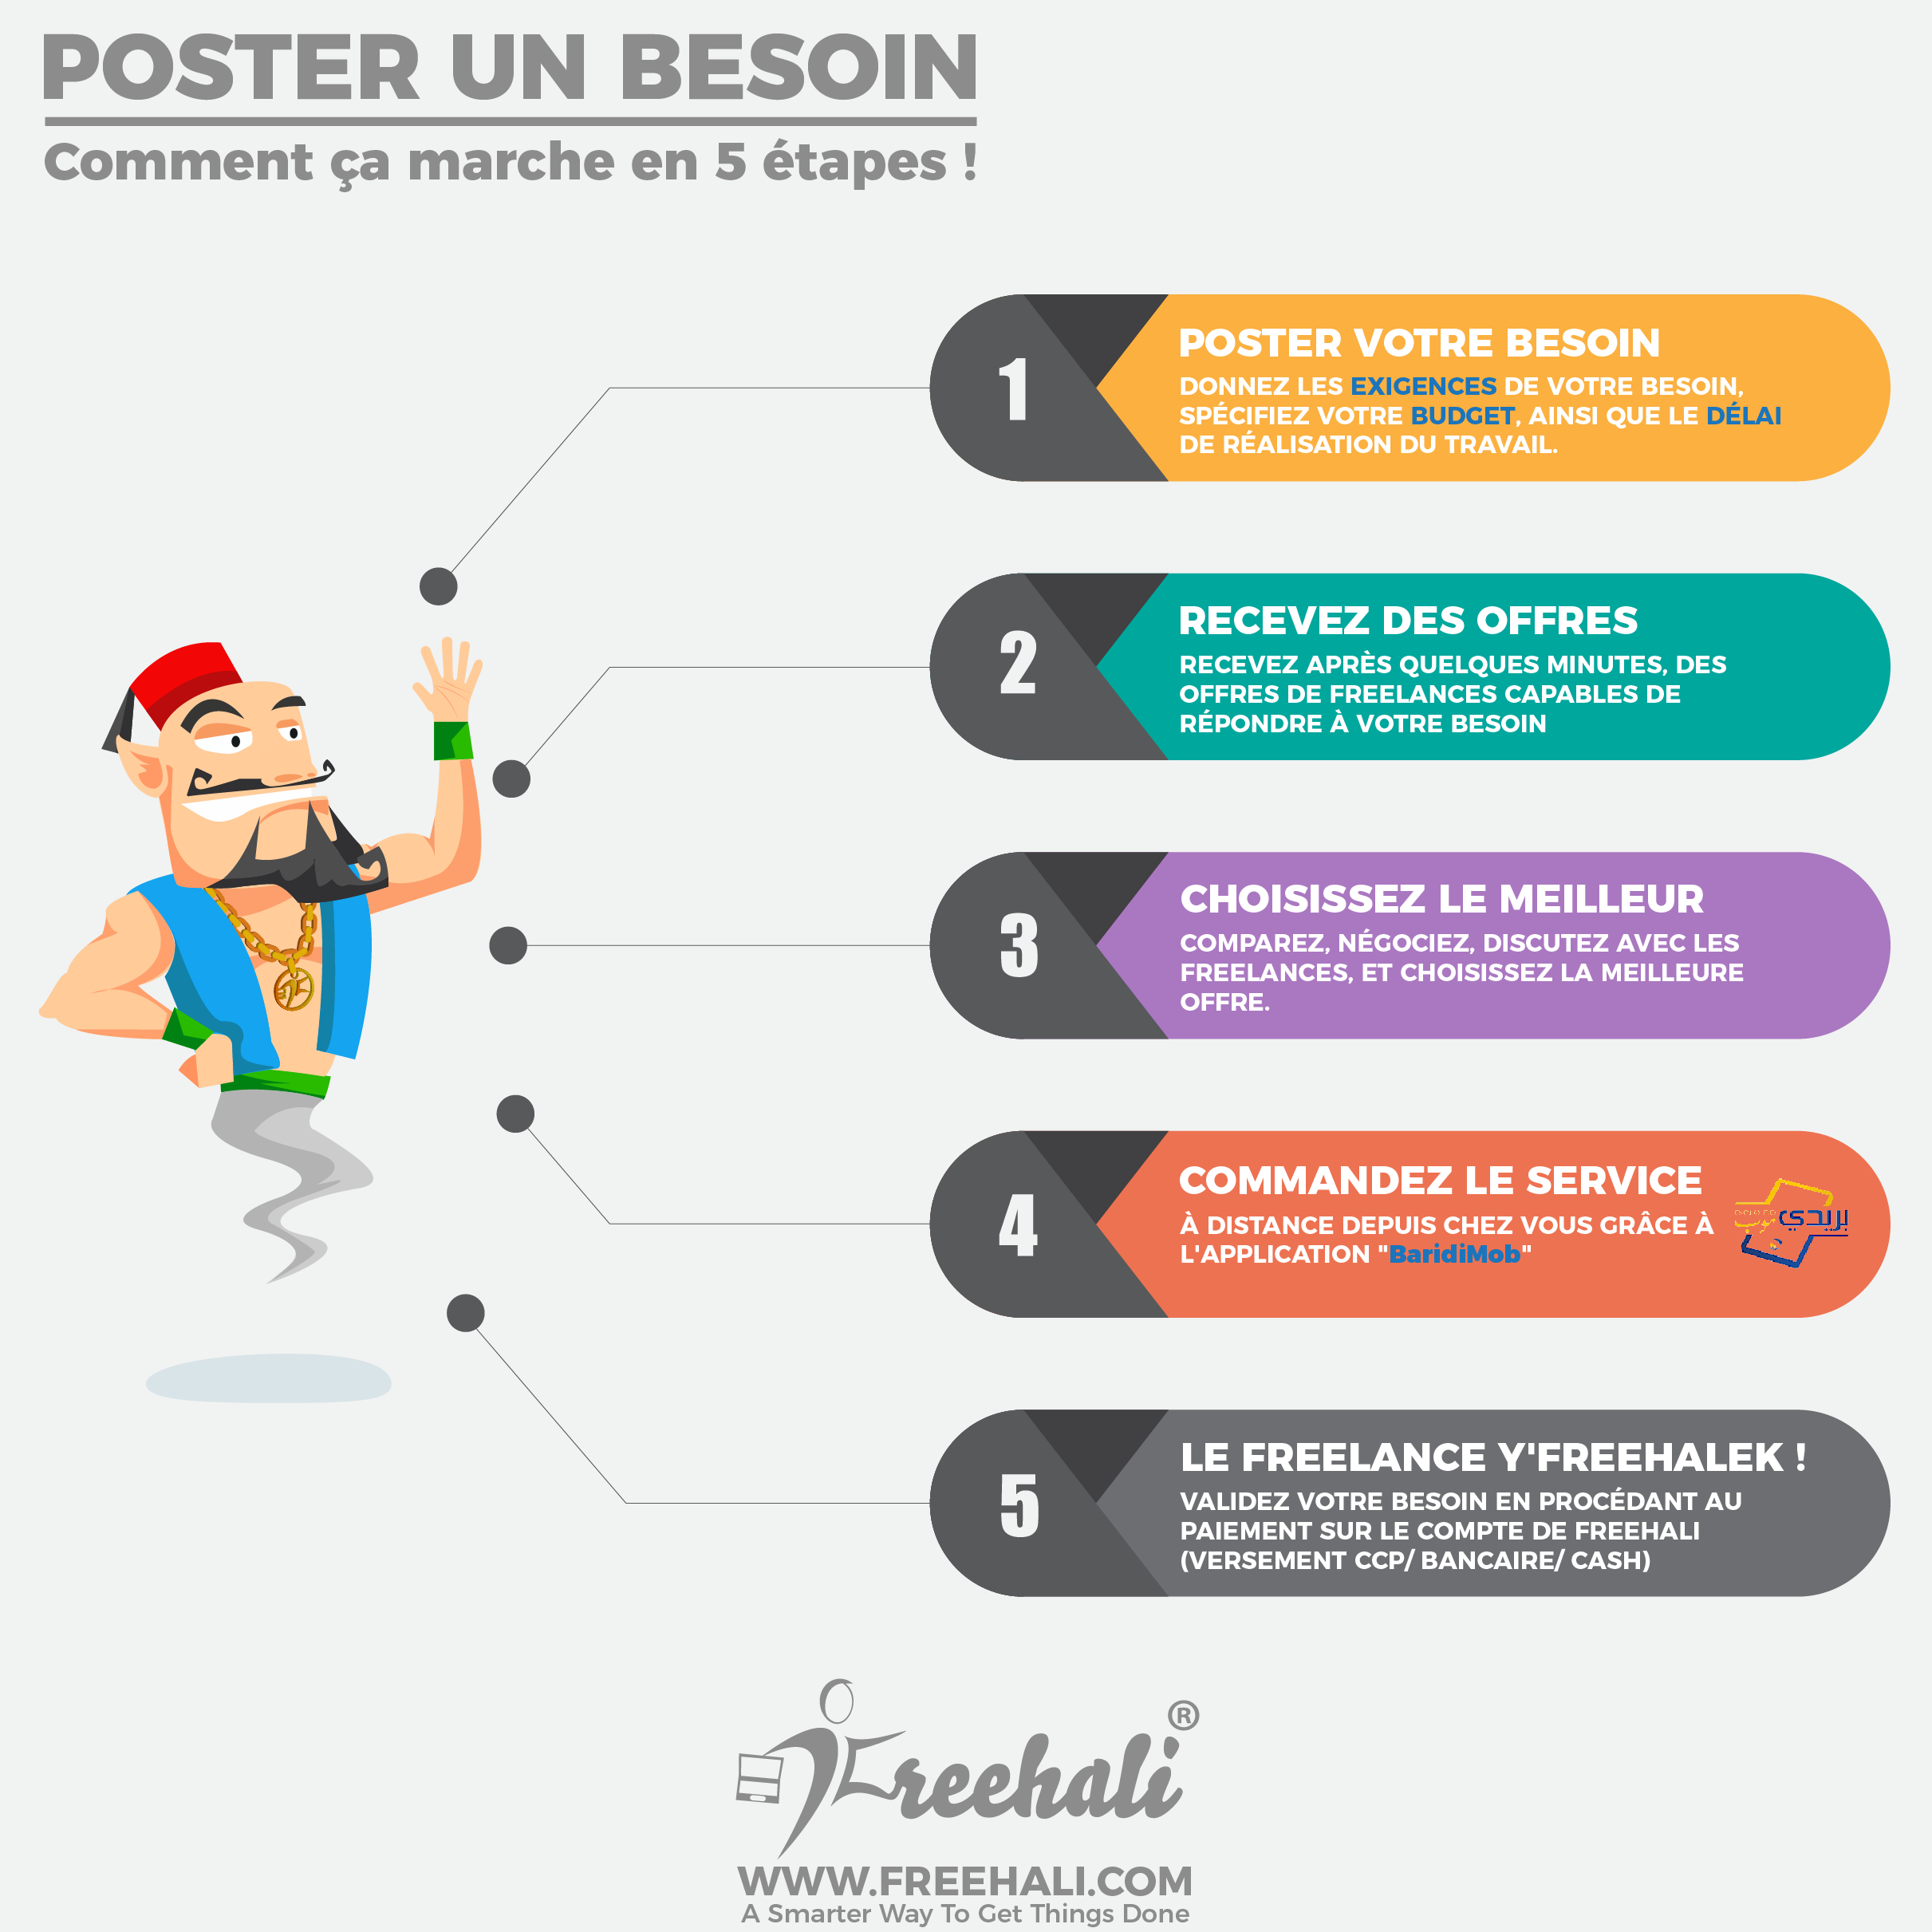 Poster Besoin